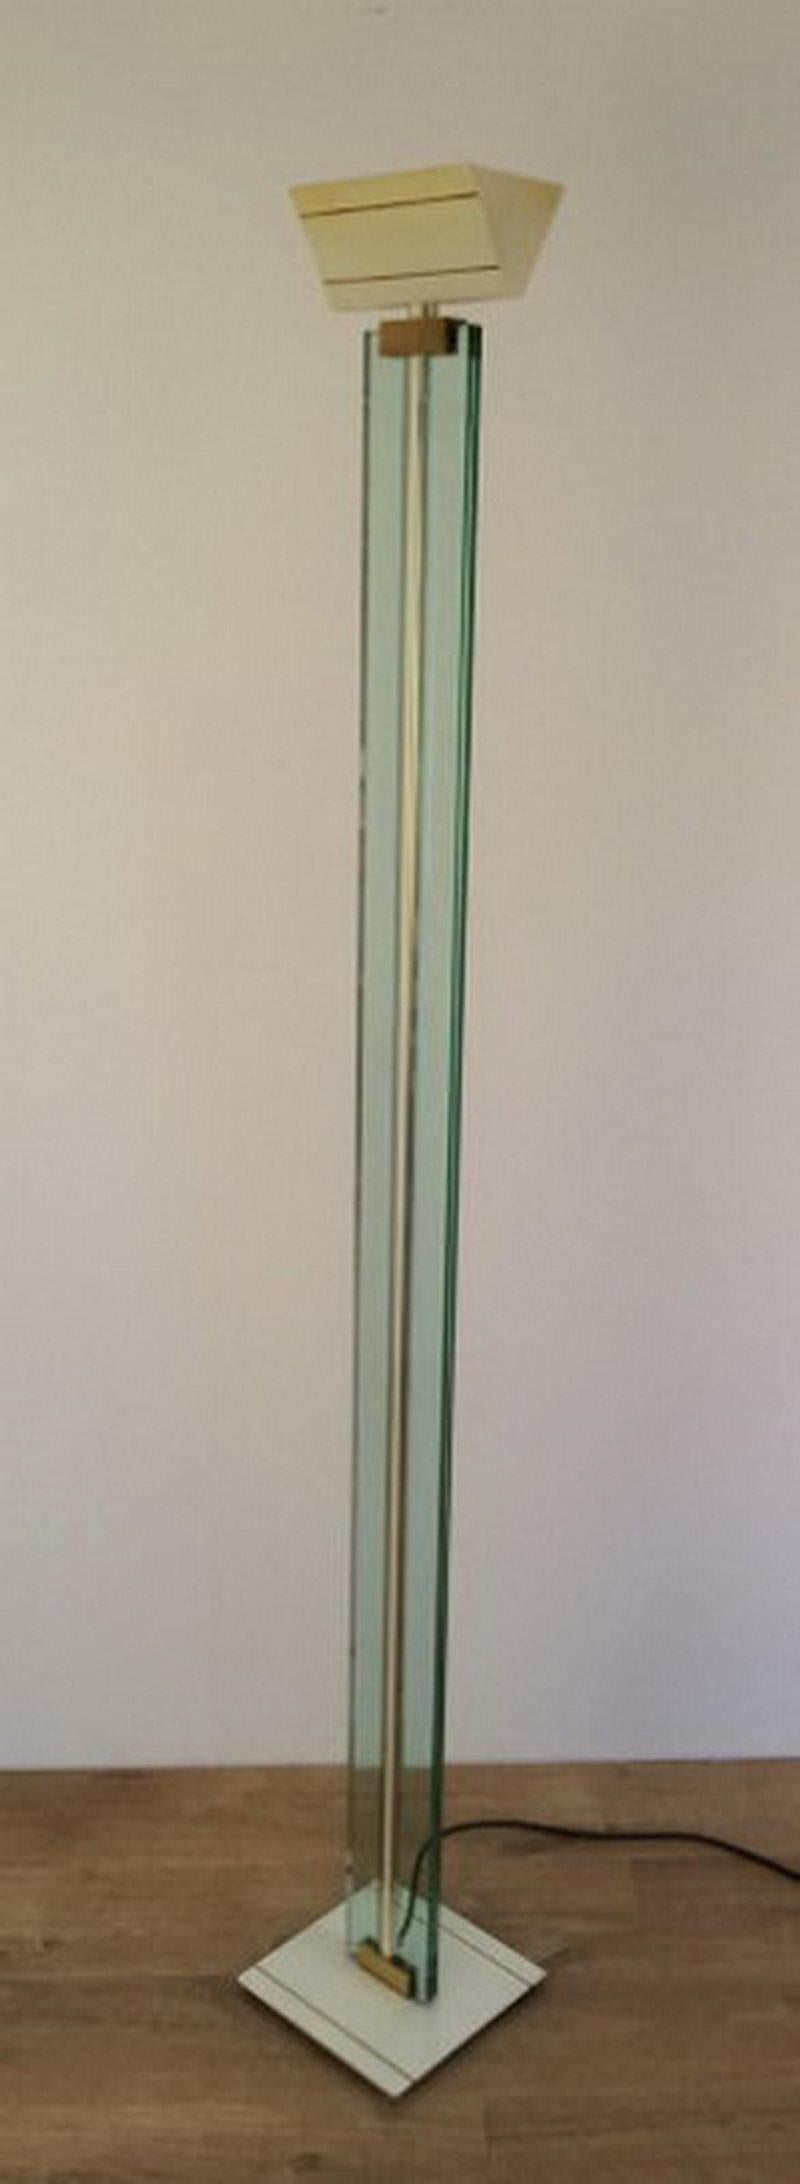 Glass, brass and lacquered metal floor lamp. Circa 1970.